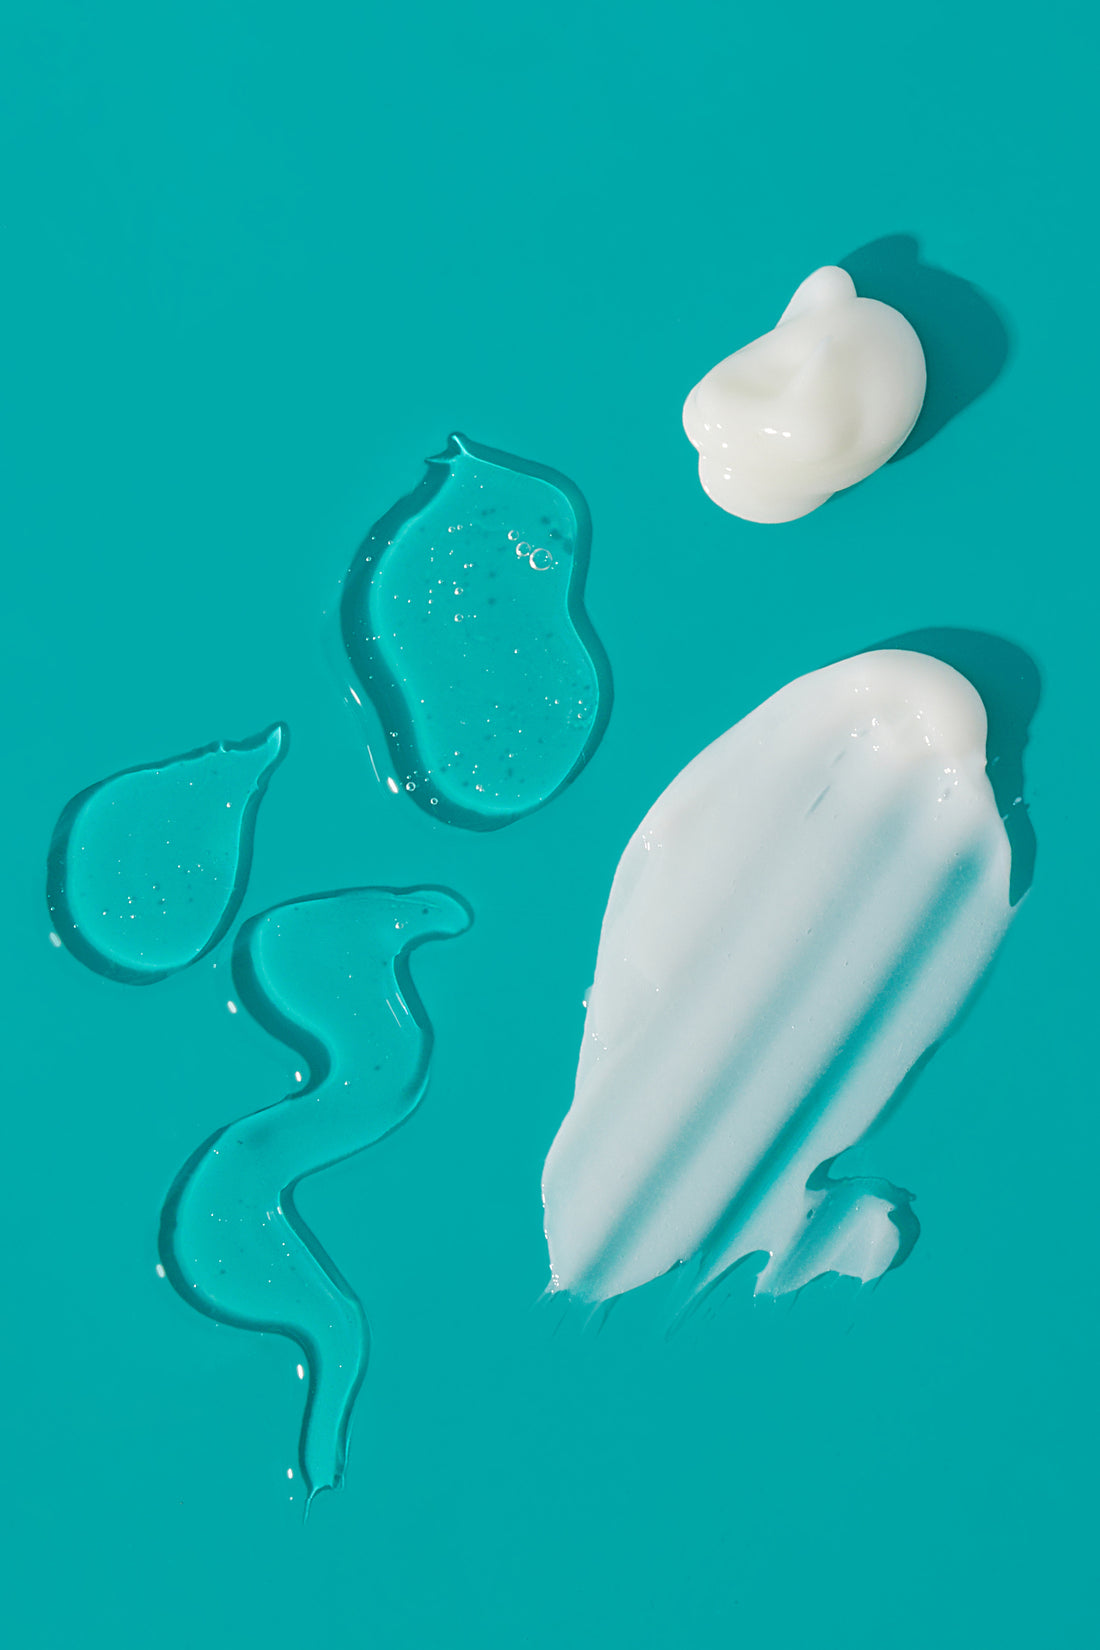 shampoo and conditioner goop on teal background